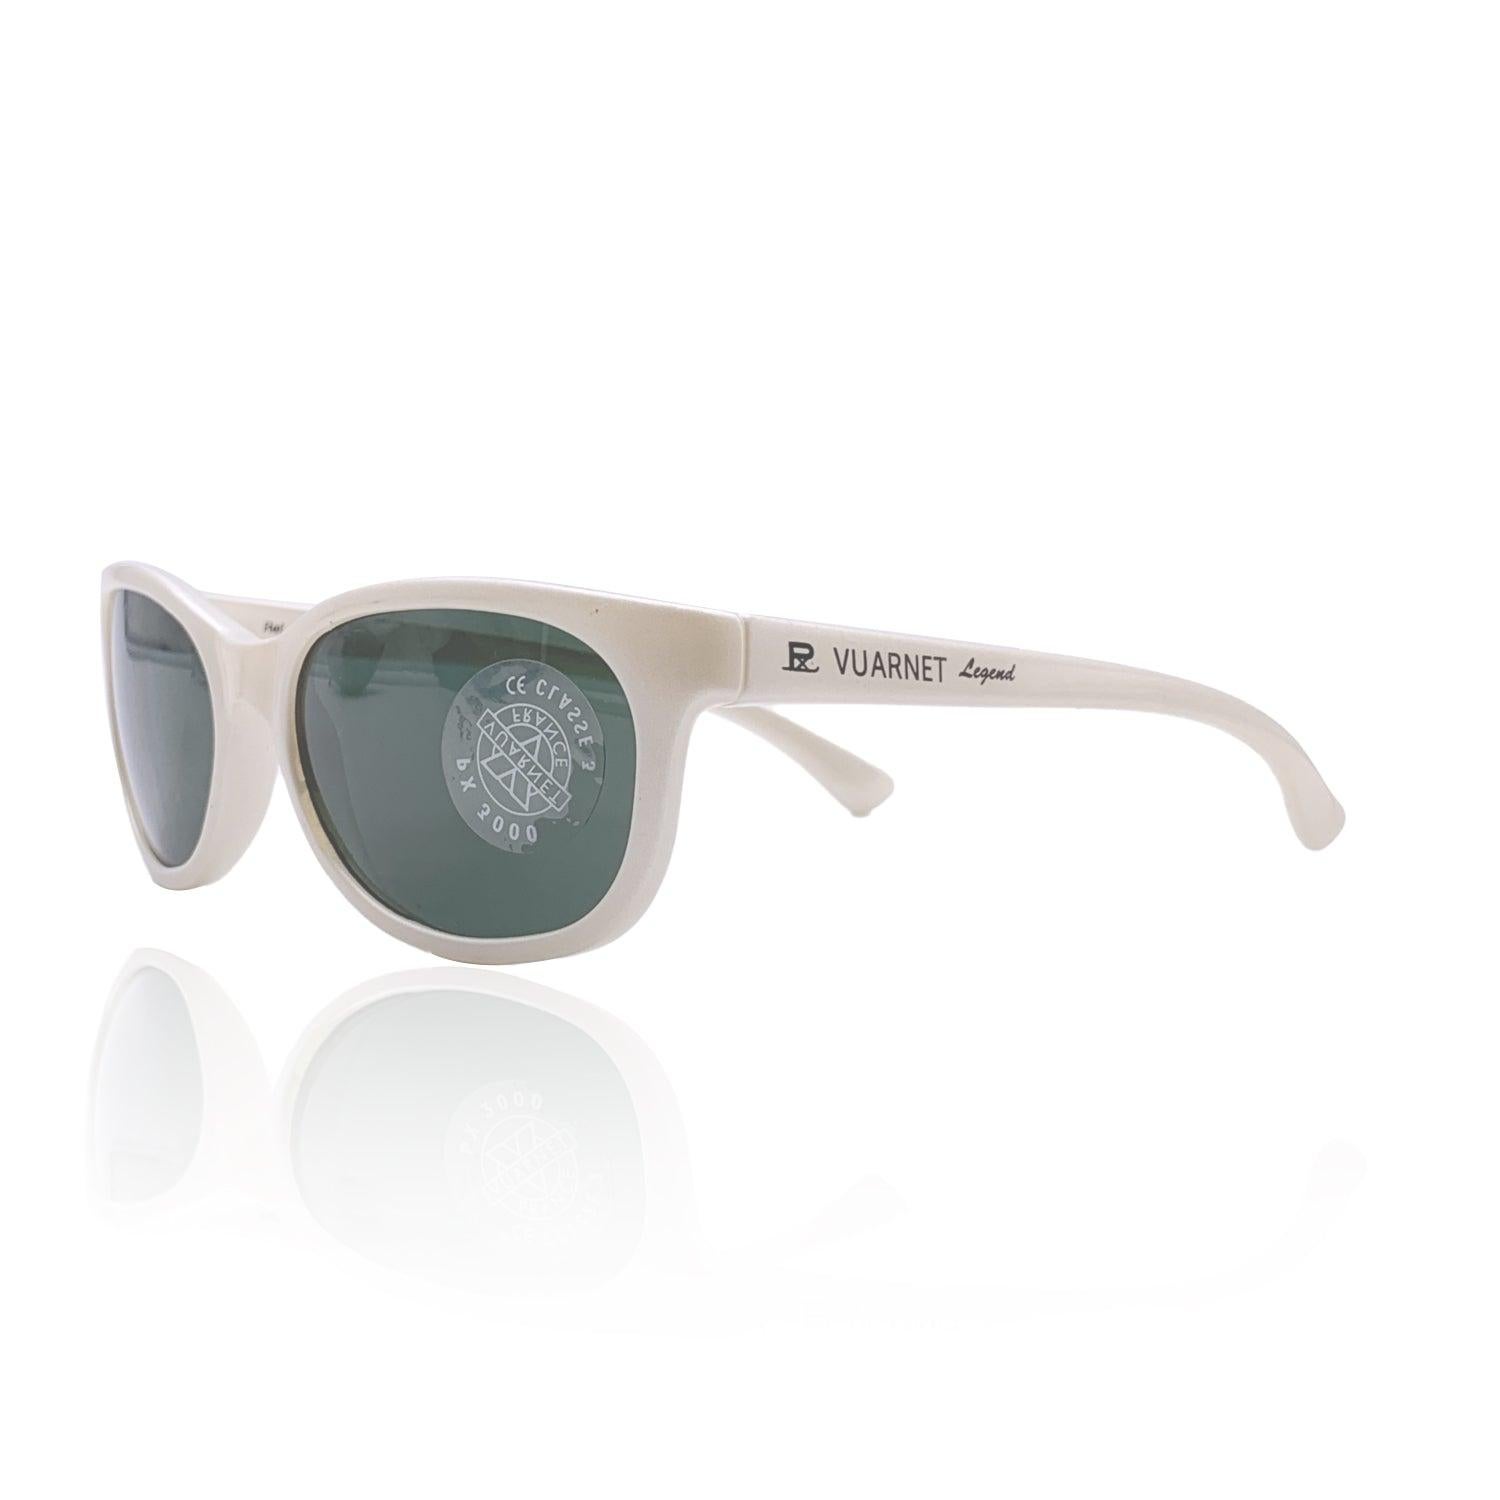 Vuarnet Legend Vintage Sunglasses, Model 112. Oval white plastic frame with PX 2000 mineral lenses in green color. Made in France Condition A+ - MINT NEW OLD STOCK - Never worn or used Details MATERIAL: Plastic COLOR: White MODEL: 112 GENDER: Unisex